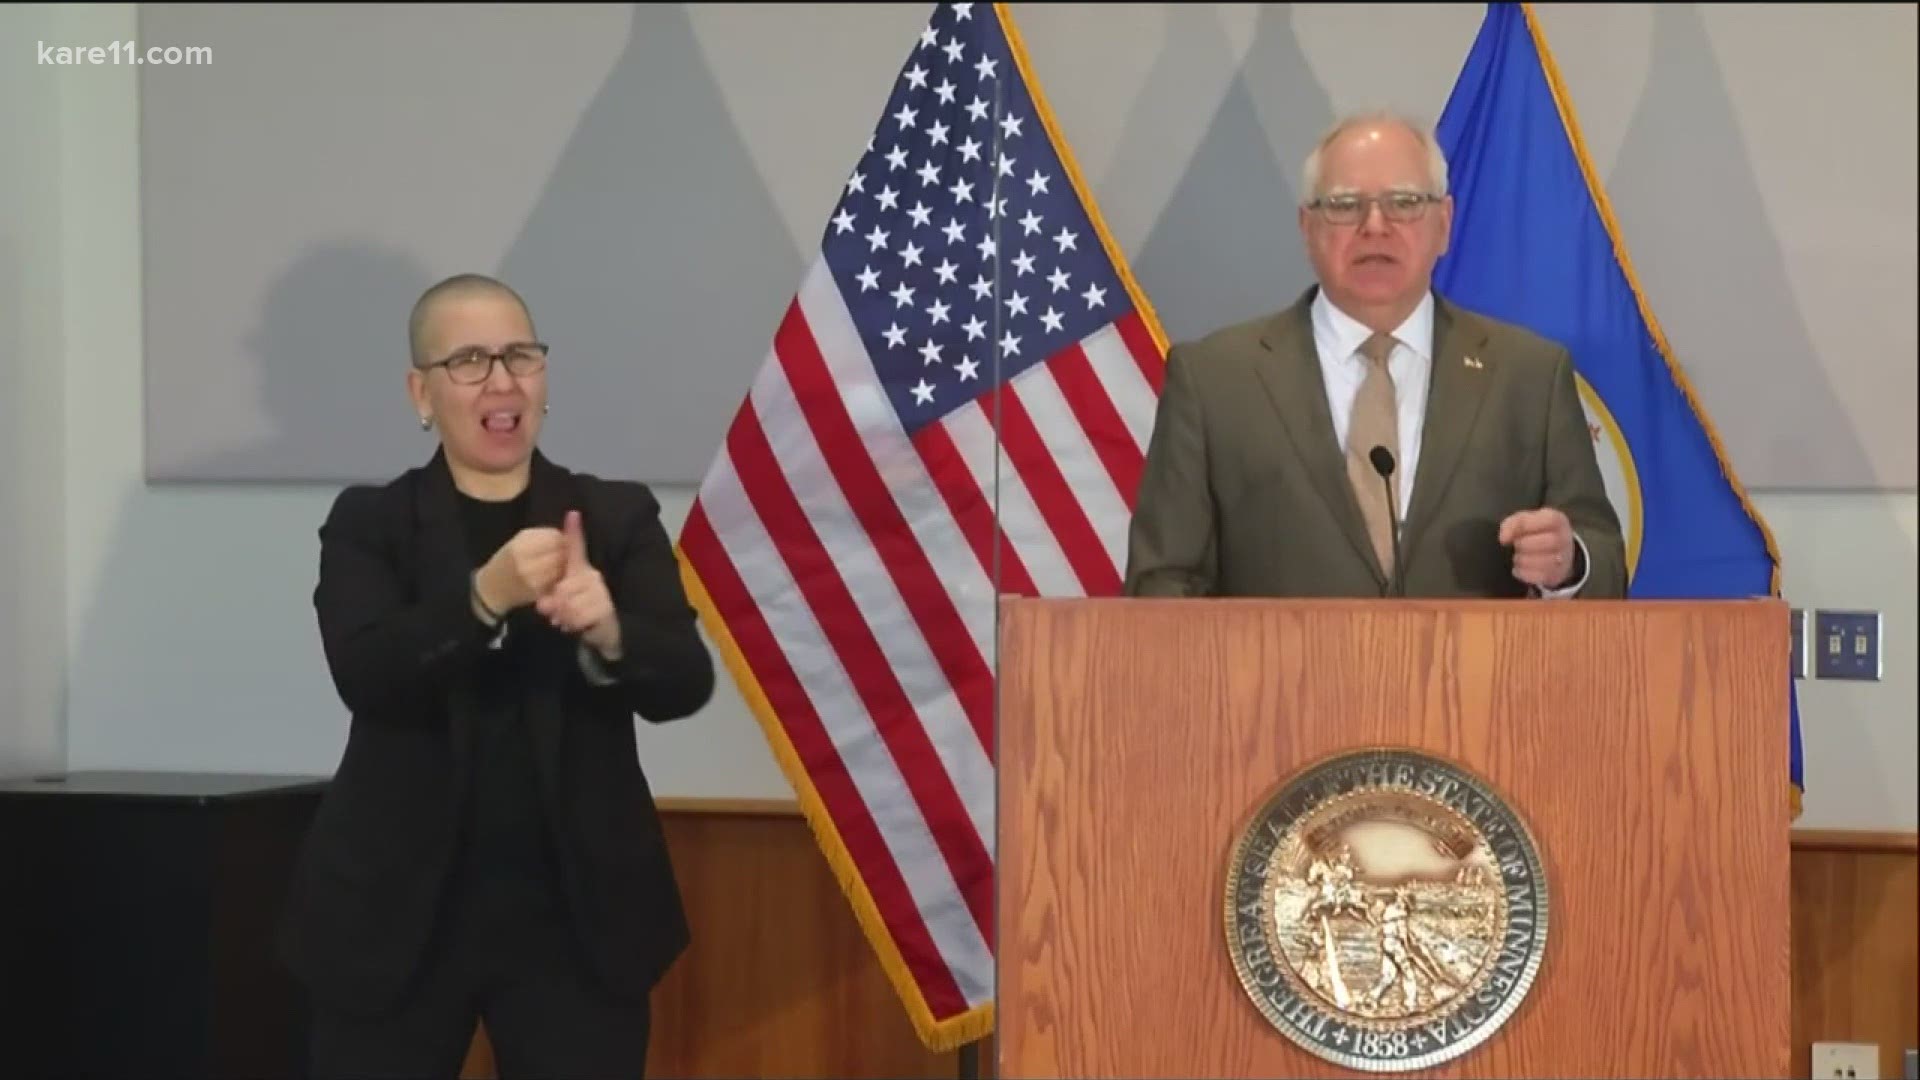 Minnesota Governor Tim Walz outlined his budget priorities Tuesday, with an emphasis on education